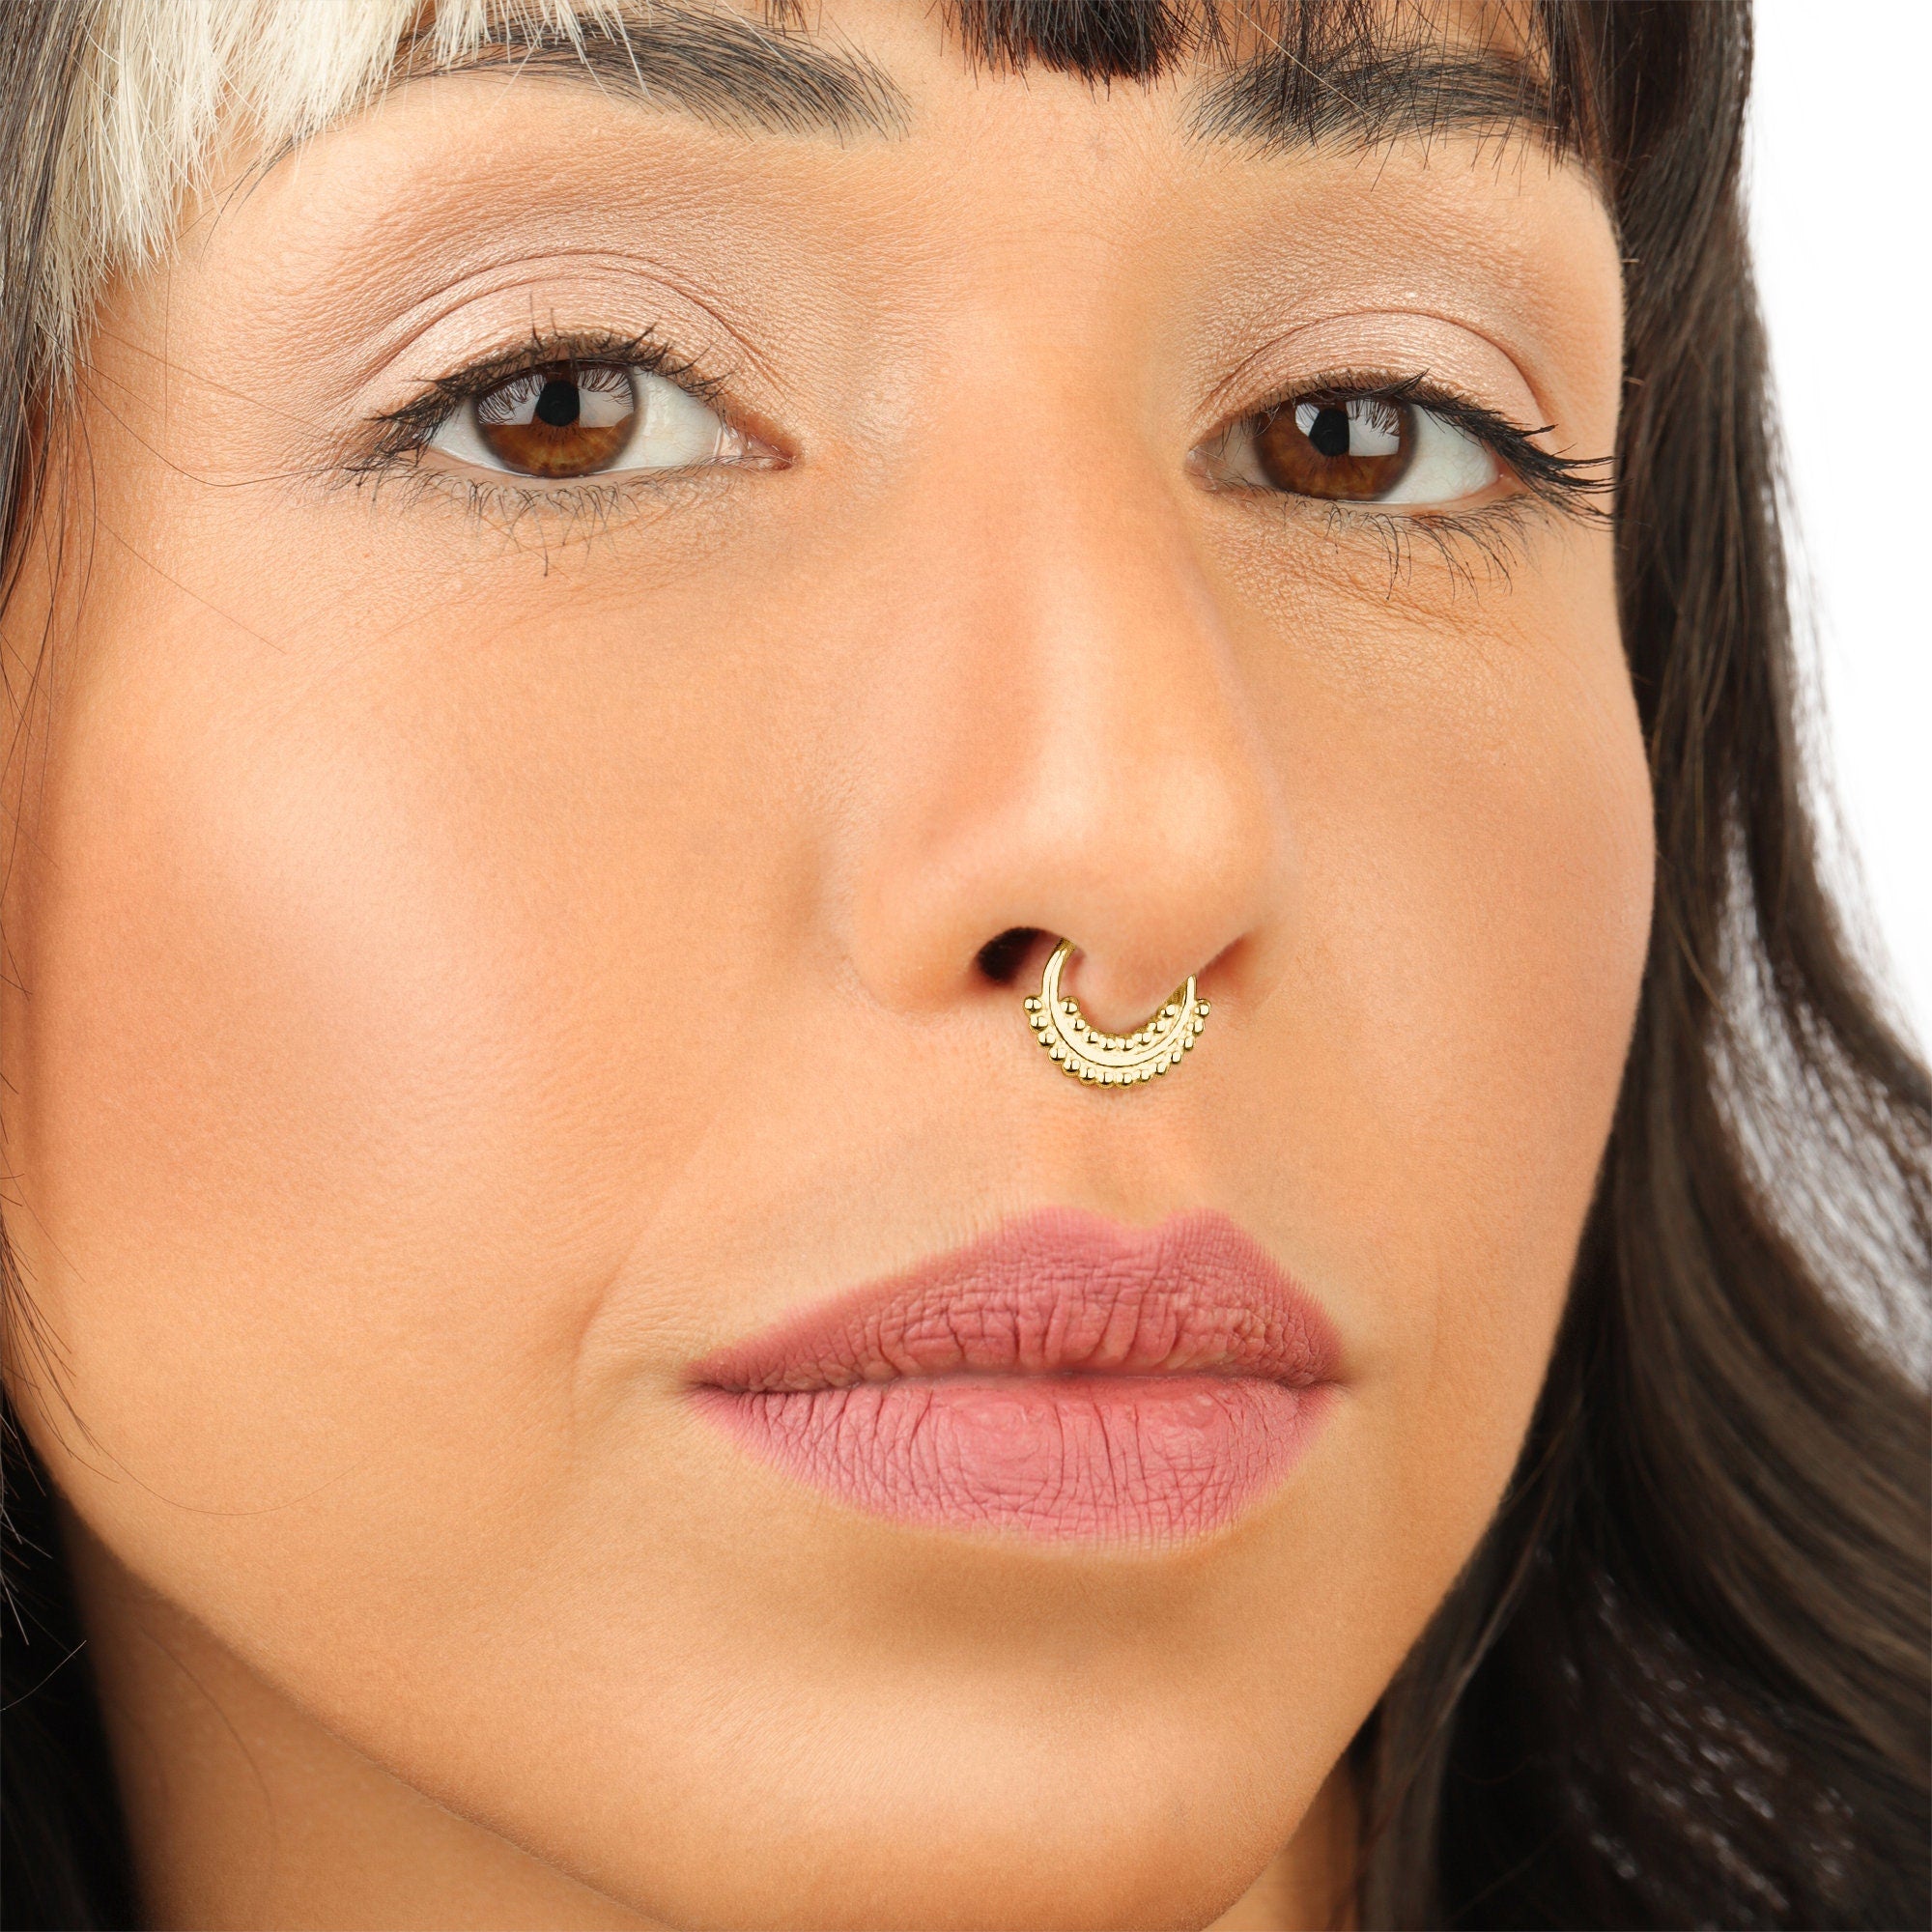 Magnet Piercing Nose | Magnetic Nose Ring | Piercing Magnetic | Piercing  Jewelry - Fake - Aliexpress